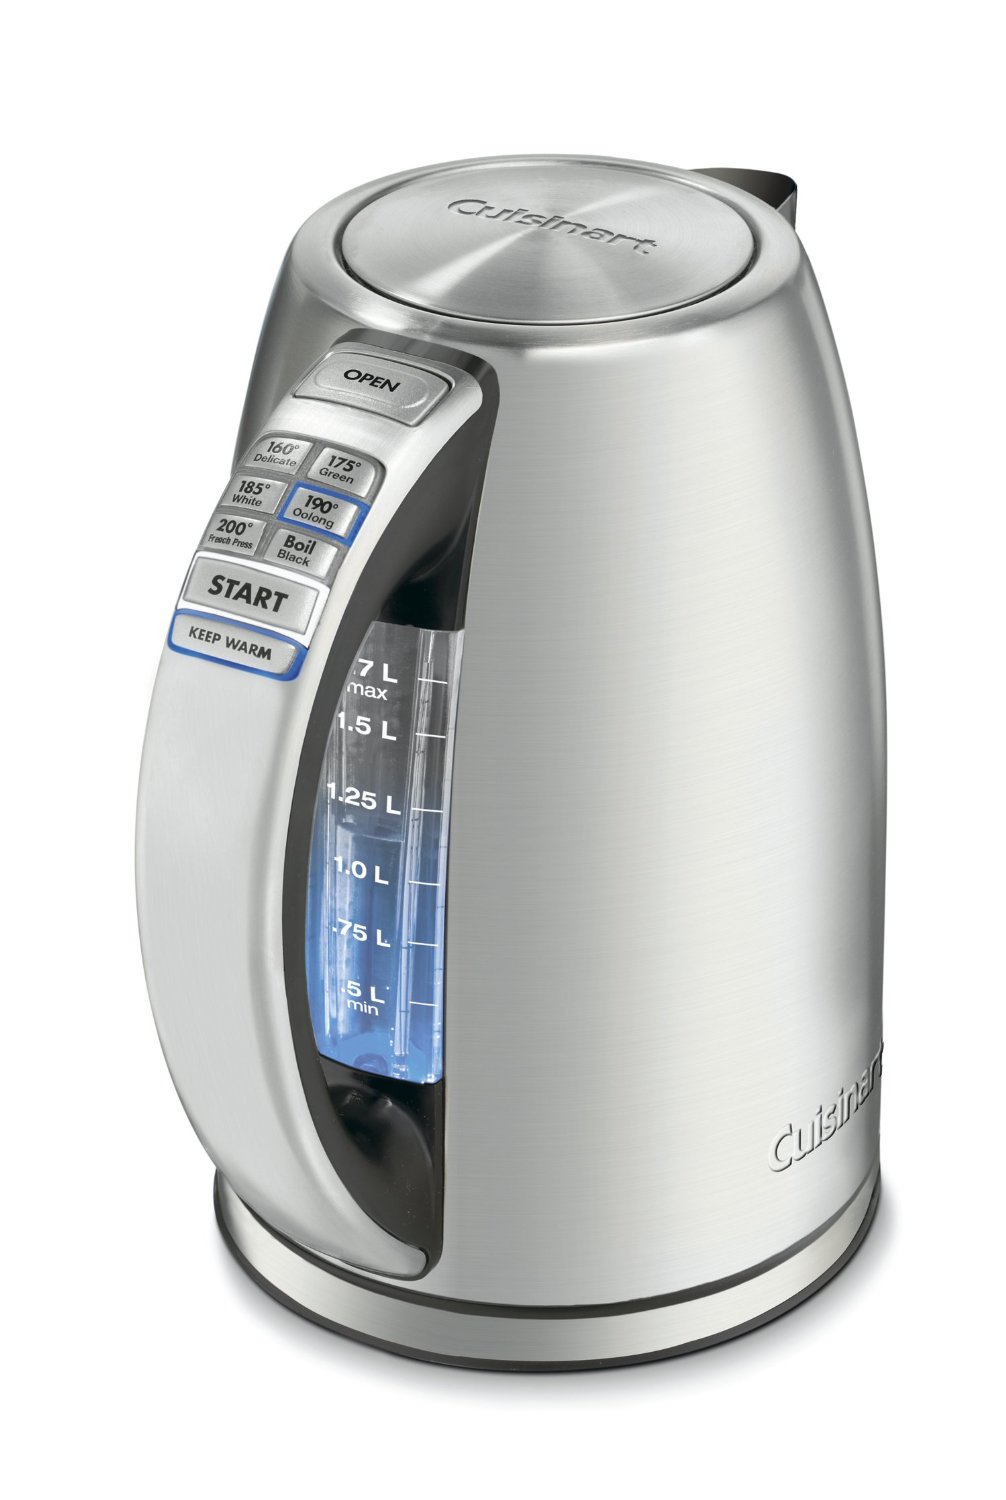 Cuisinart CPK-17 PerfecTemp Stainless Steel Cordless Electric Kettle Review